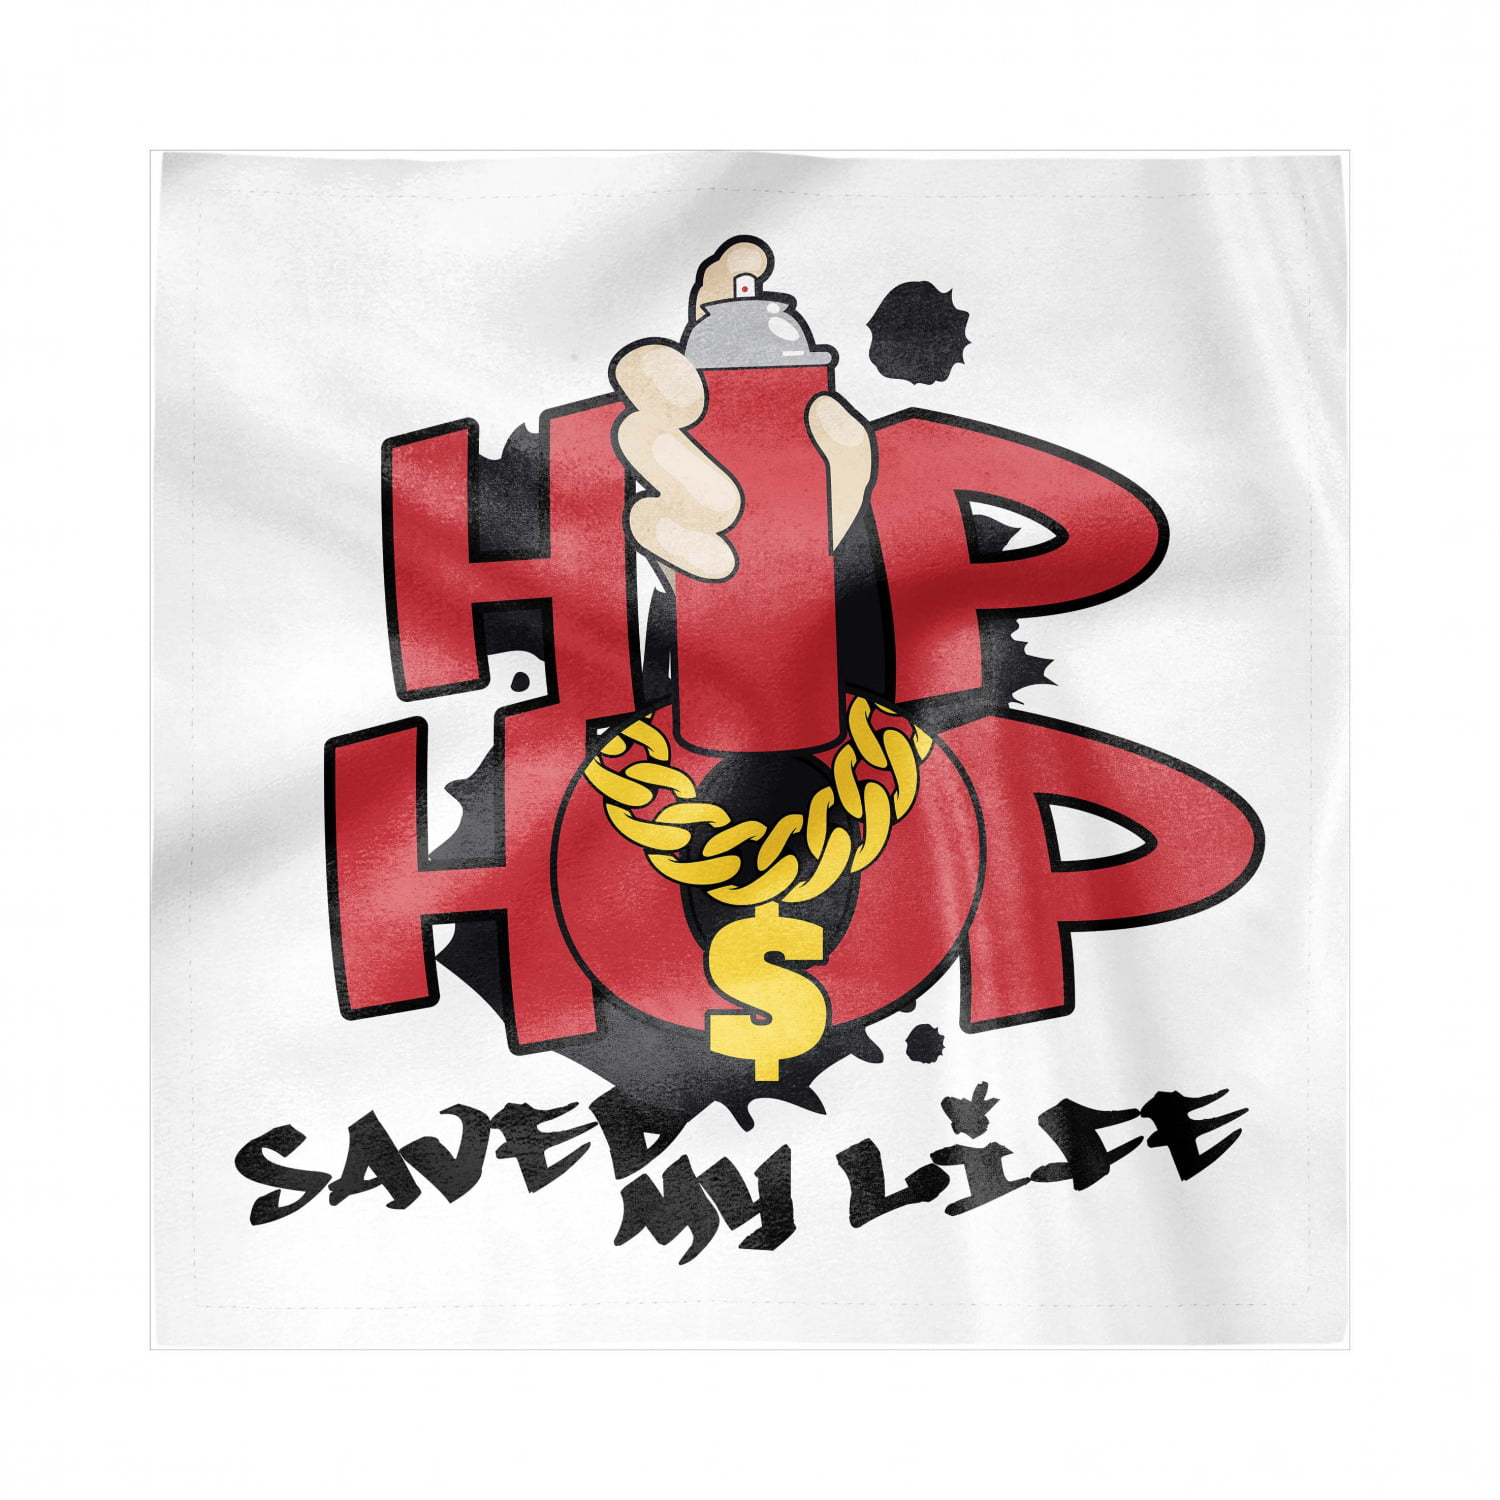 Ambesonne Hip Hop Place Mats Set of 4 Vermilion Black Yellow Washable Fabric Placemats for Dining Room Kitchen Table Decor Hip Hop Saved My Life Phrase in Grafitti Style with Spray Chain